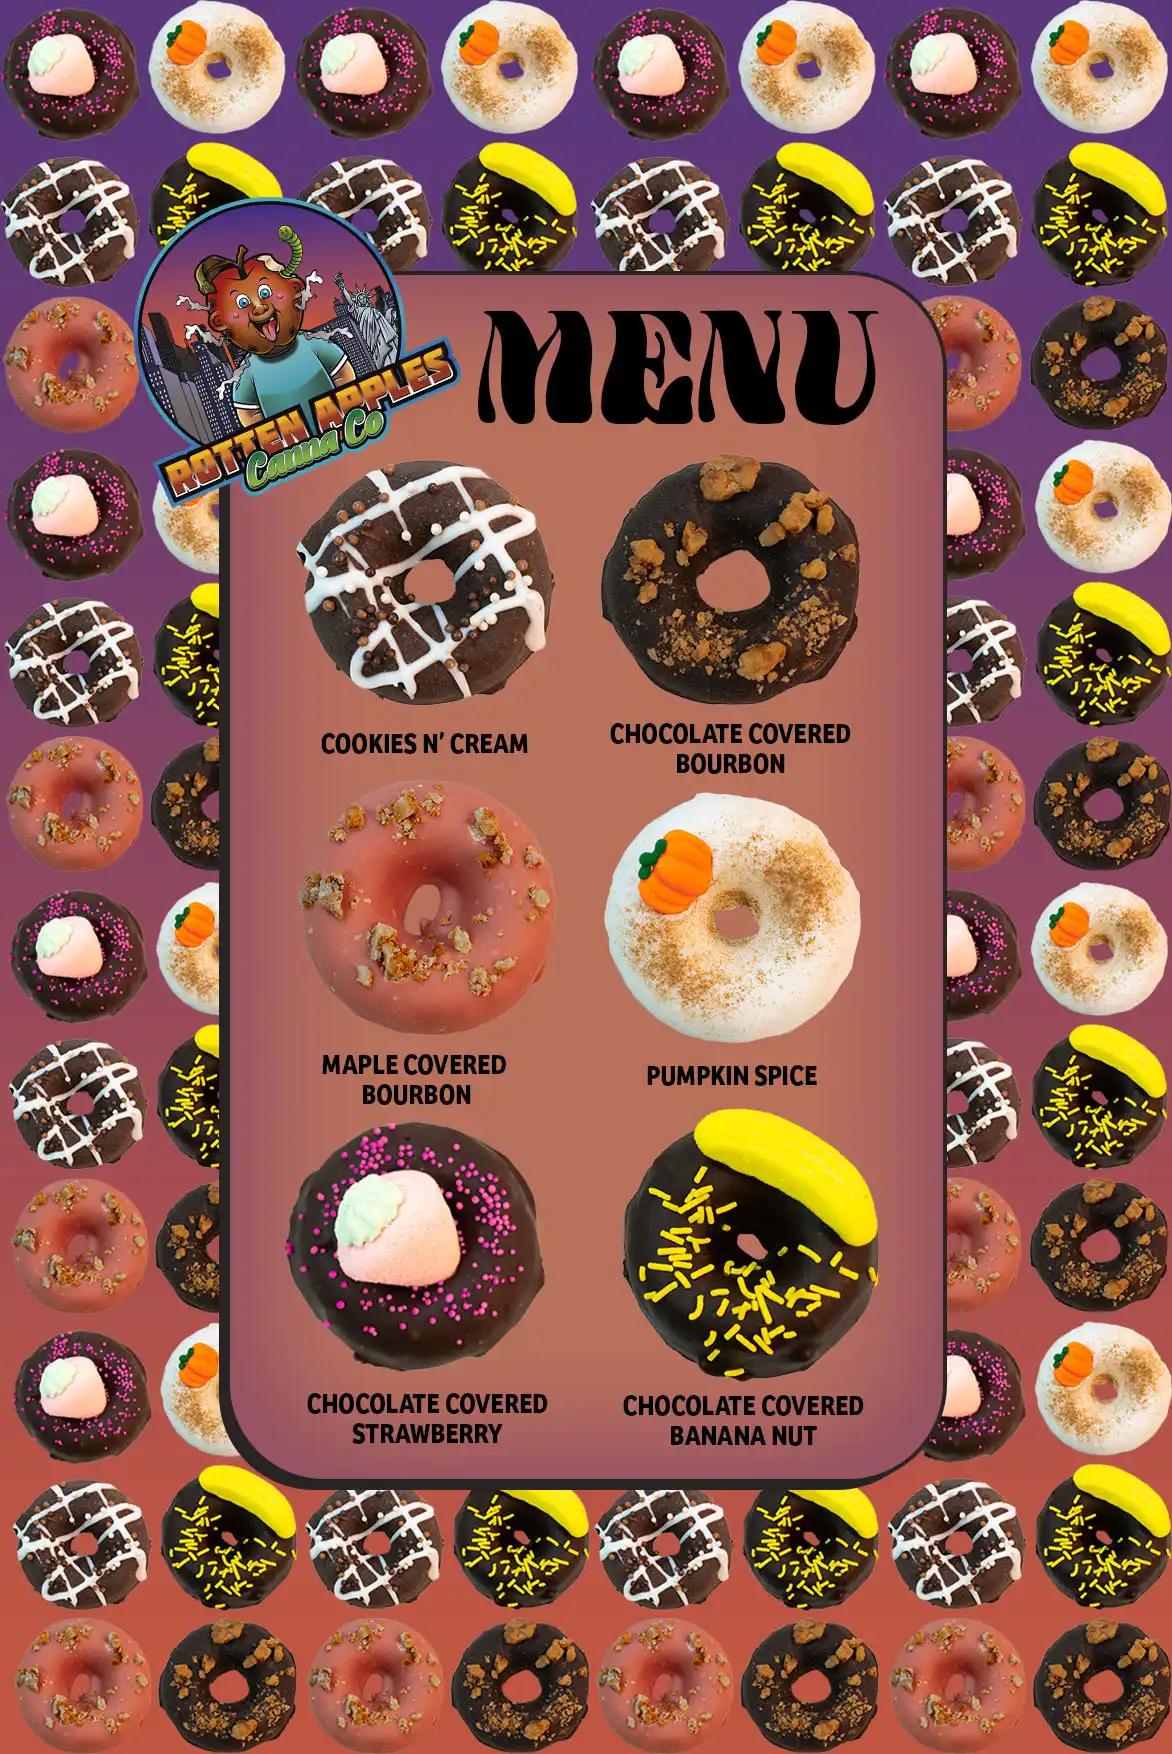 Rotten Apples Canna Co.'s donut menu including six donuts, the Cookies N' Cream donut, Chocolate Covered Bourbon Donut, Maple Covered Bourbon Donut, Pumpkin Spice Donut, Chocolate Covered Strawberry Donut, and the Chocolate Covered Banana Nut Donut.